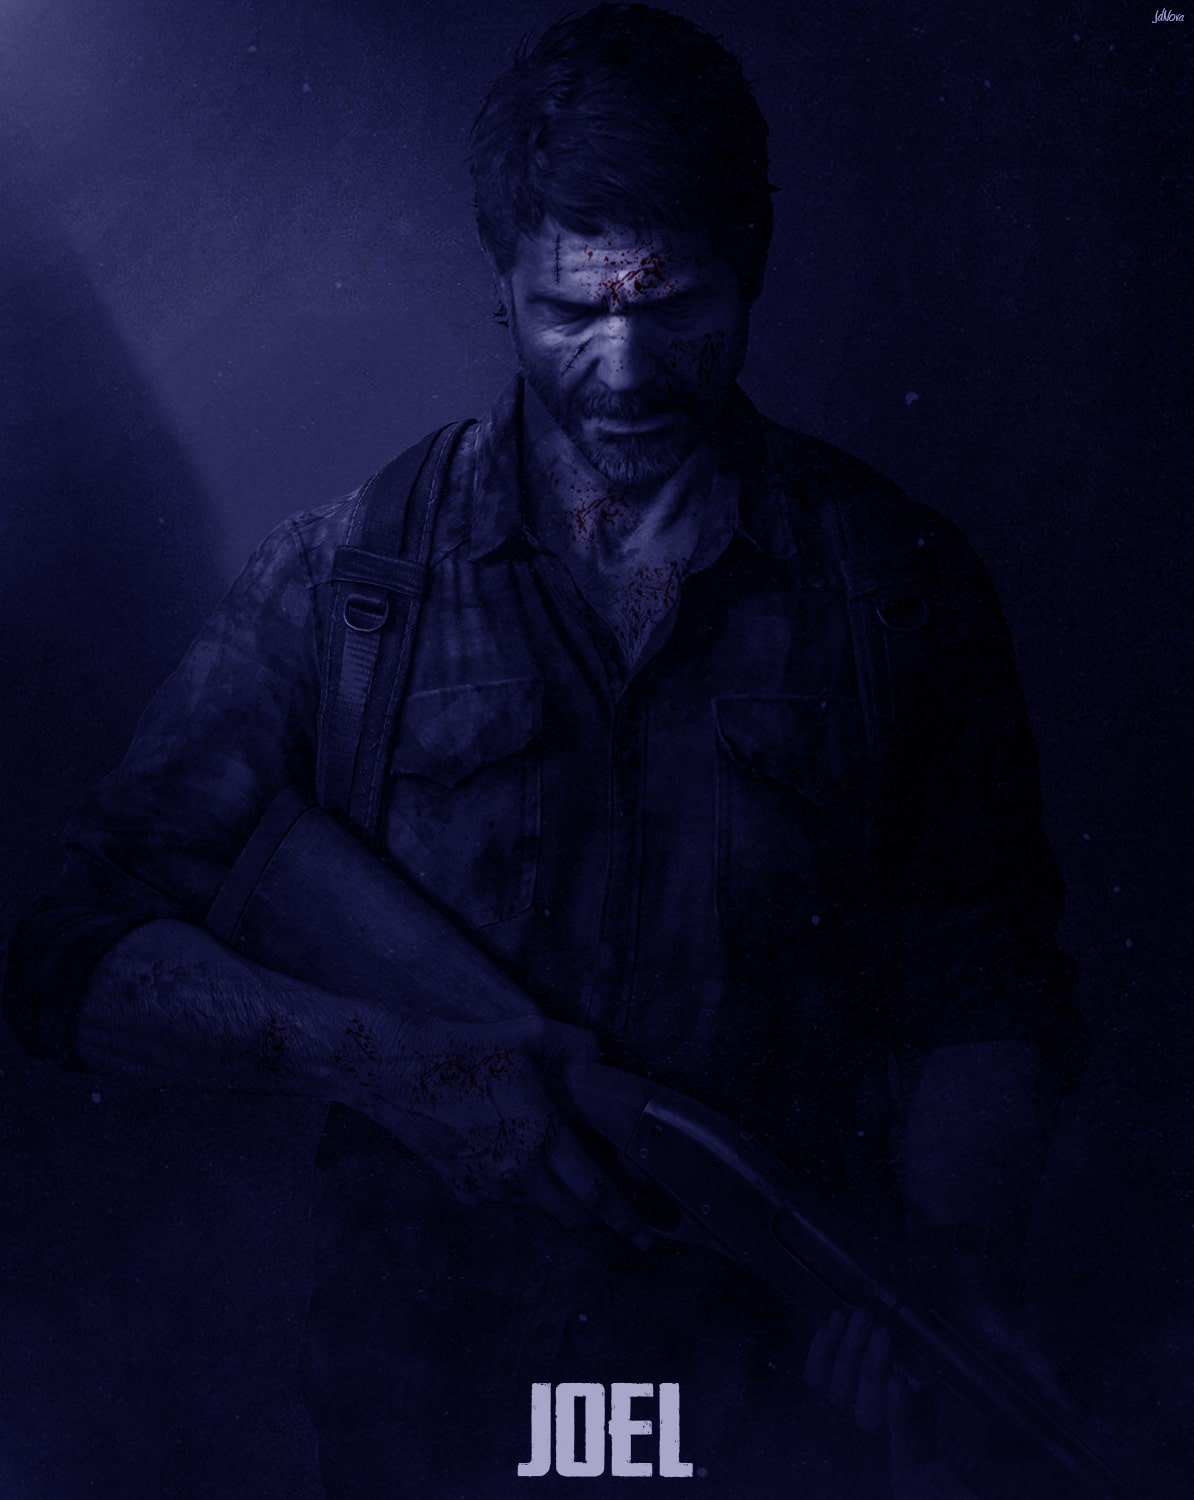 the last of us iPhone Wallpapers Free Download